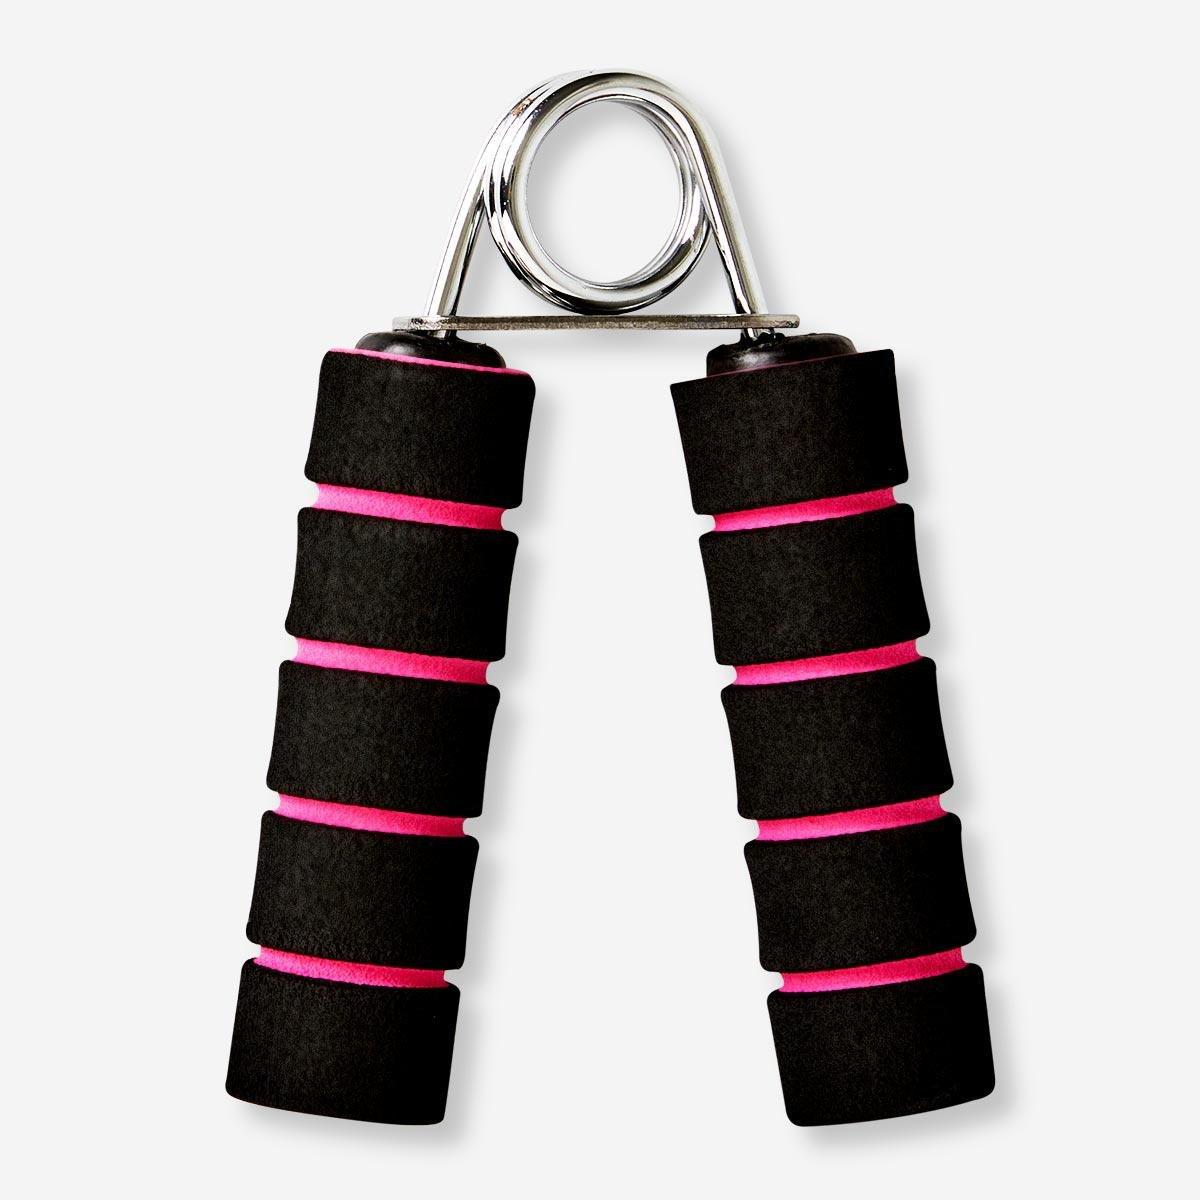 Black and pink hand grip. 5 kg